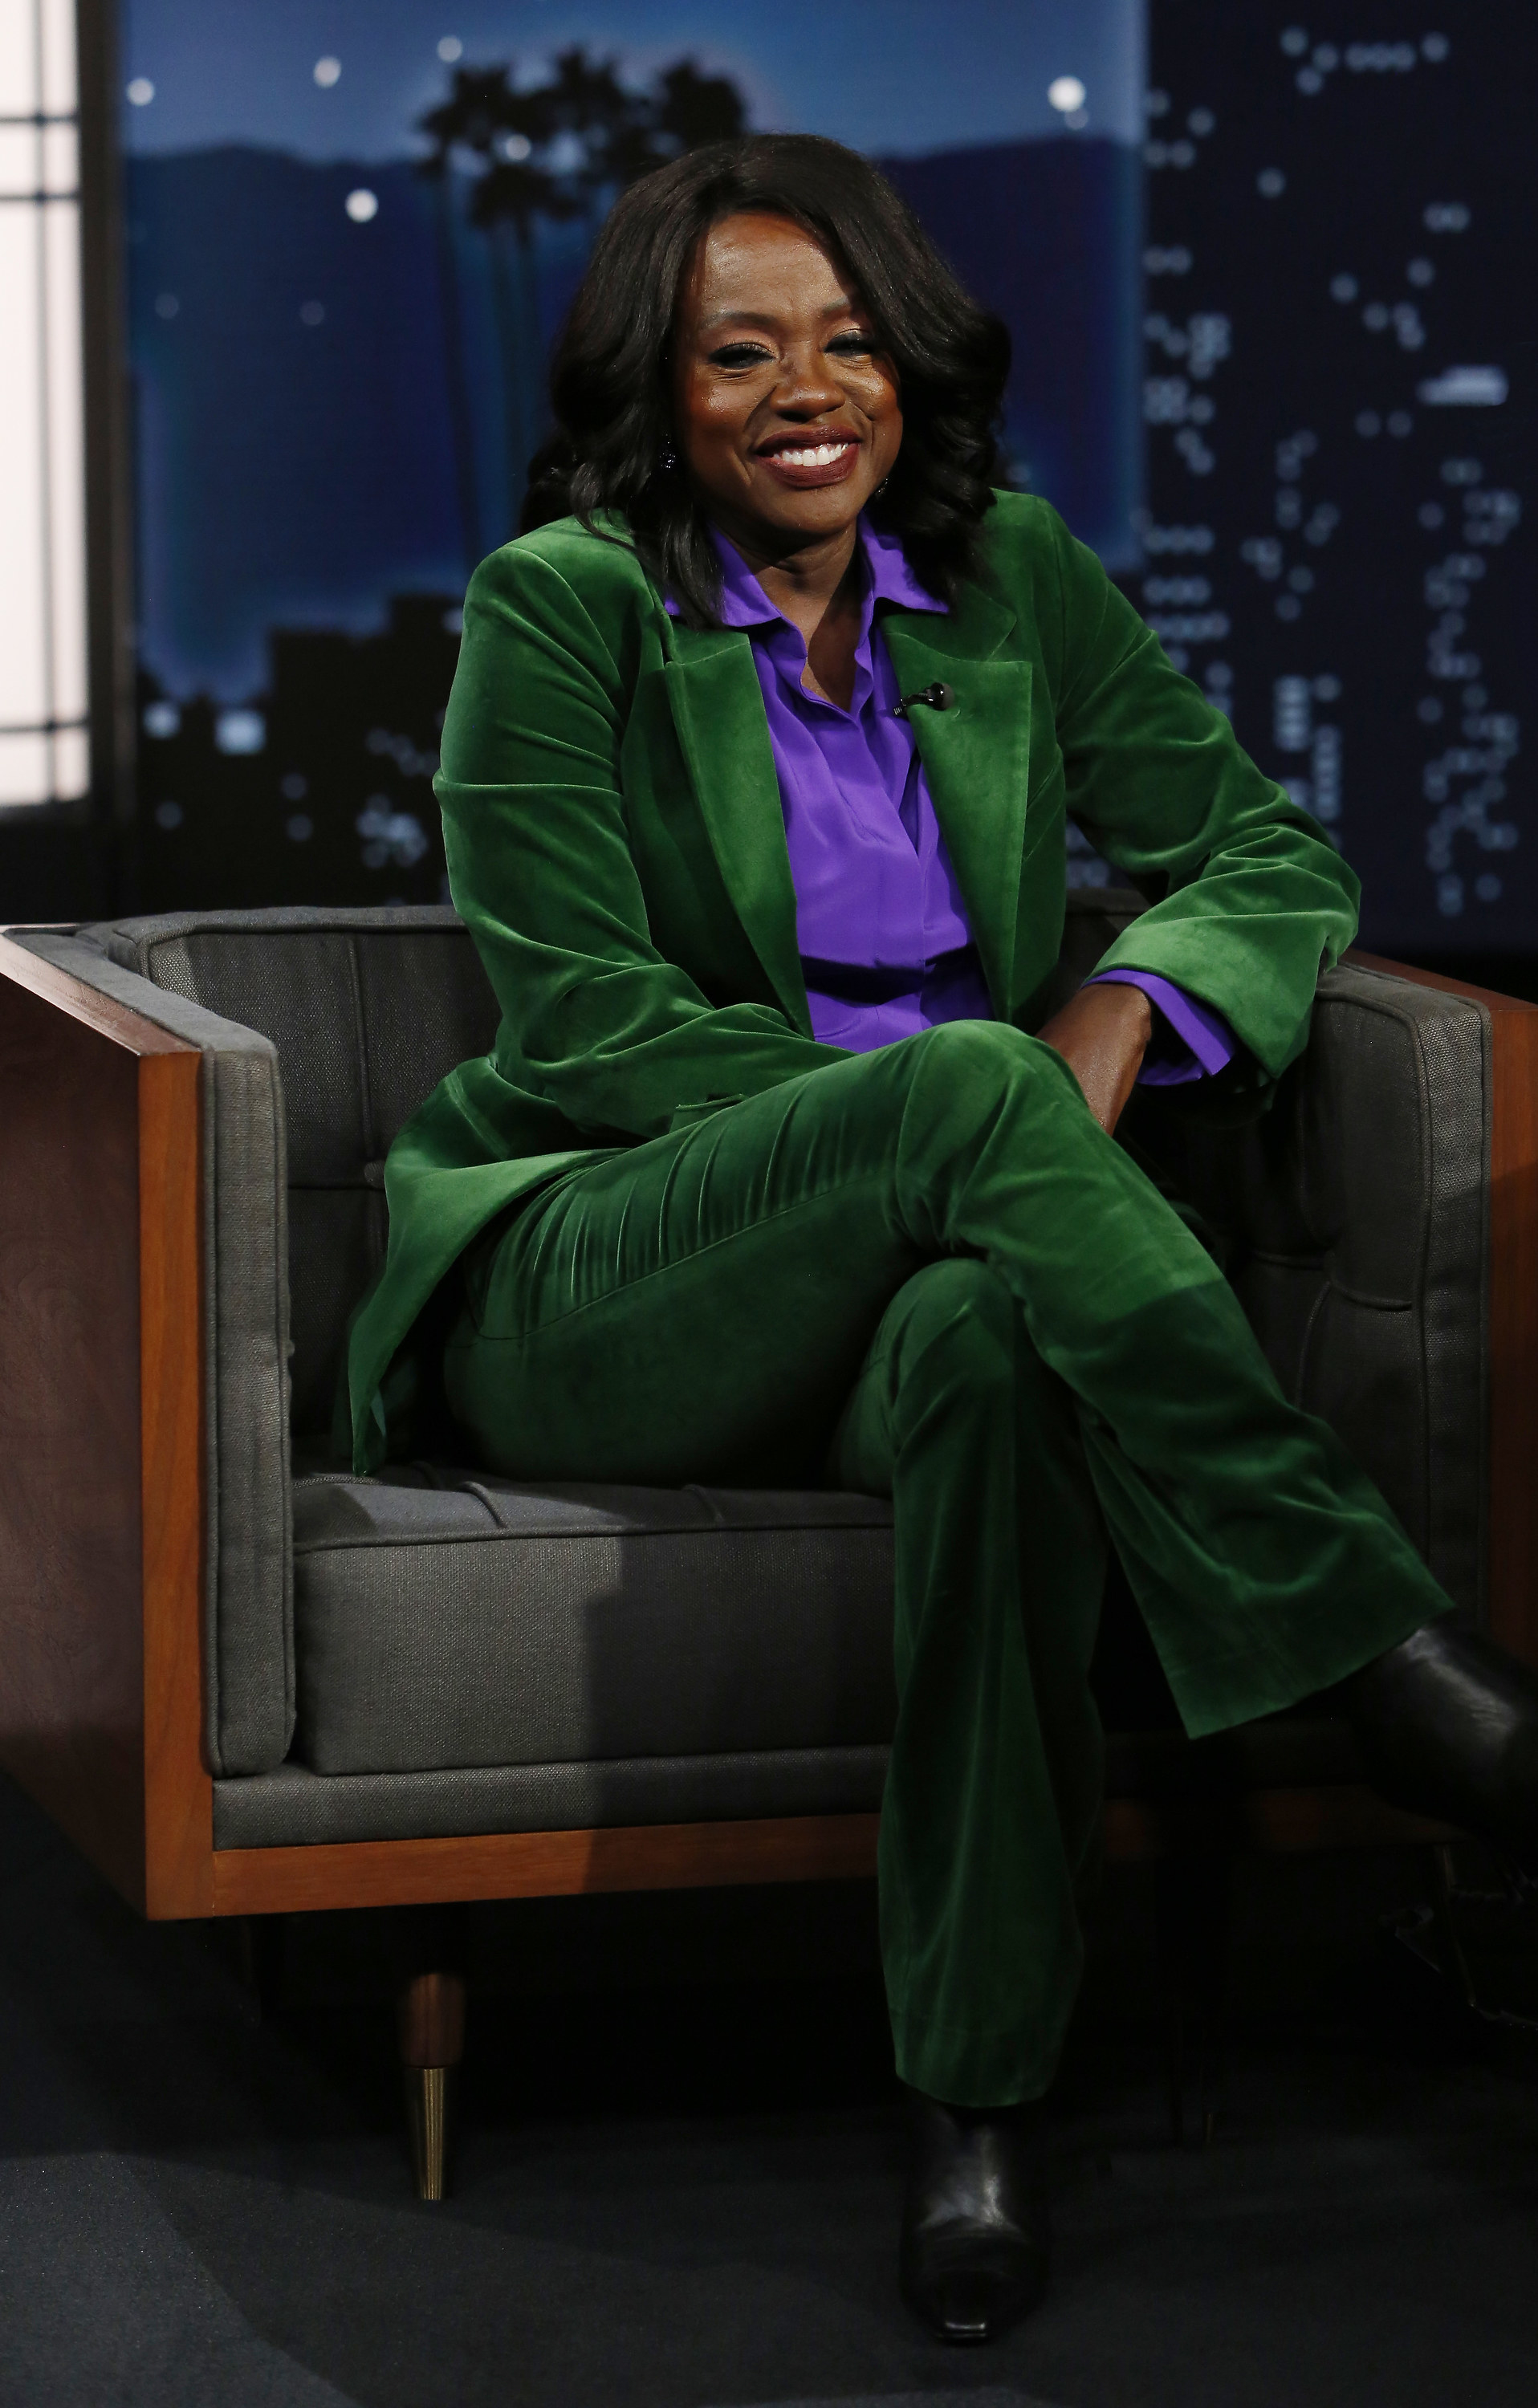 Viola sitting down for a late night talk show interview